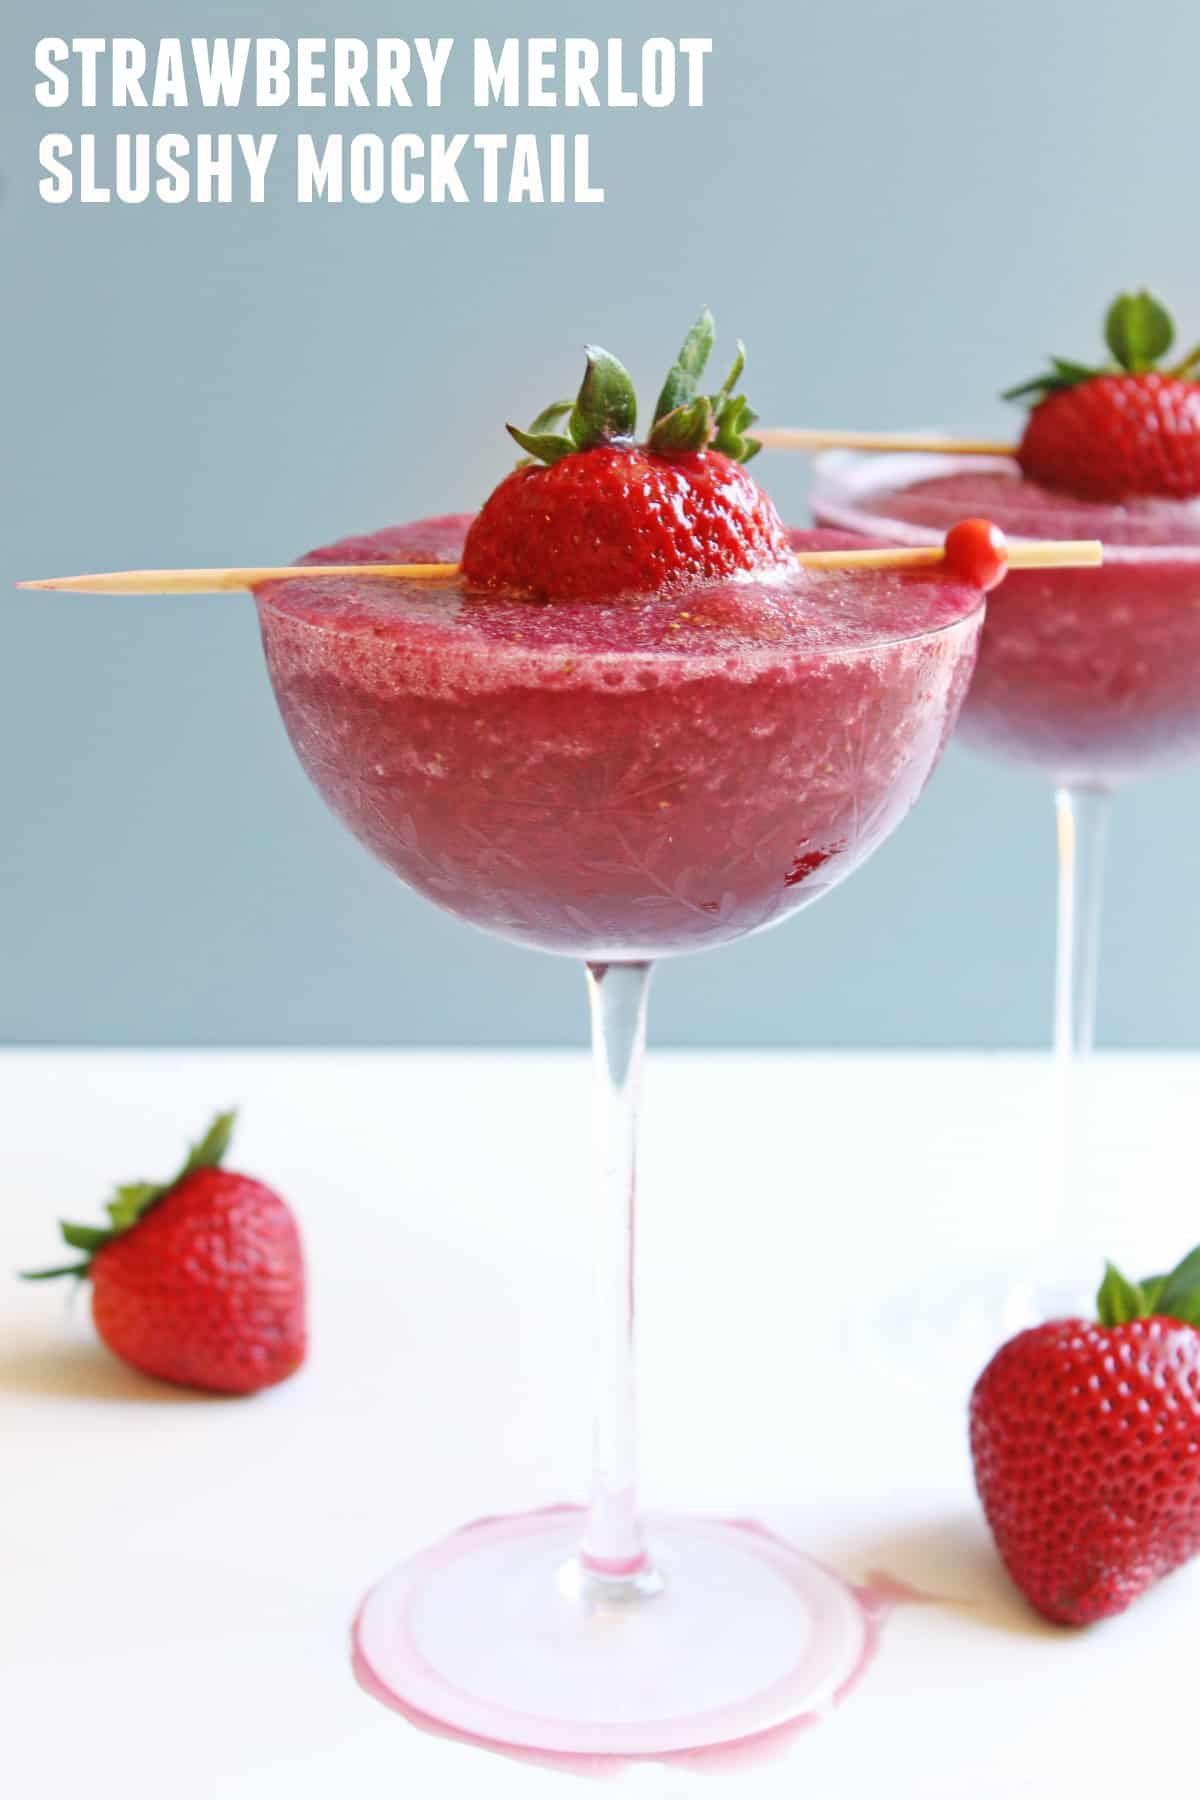 Strawberry merlot slushy mocktail recipe! Yes, you CAN enjoy wine during your pregnancy! This frozen mocktail is a blend of FRE alcohol removed wine and delicious strawberries. The perfect treat for pregnant or alcohol free wine lovers!